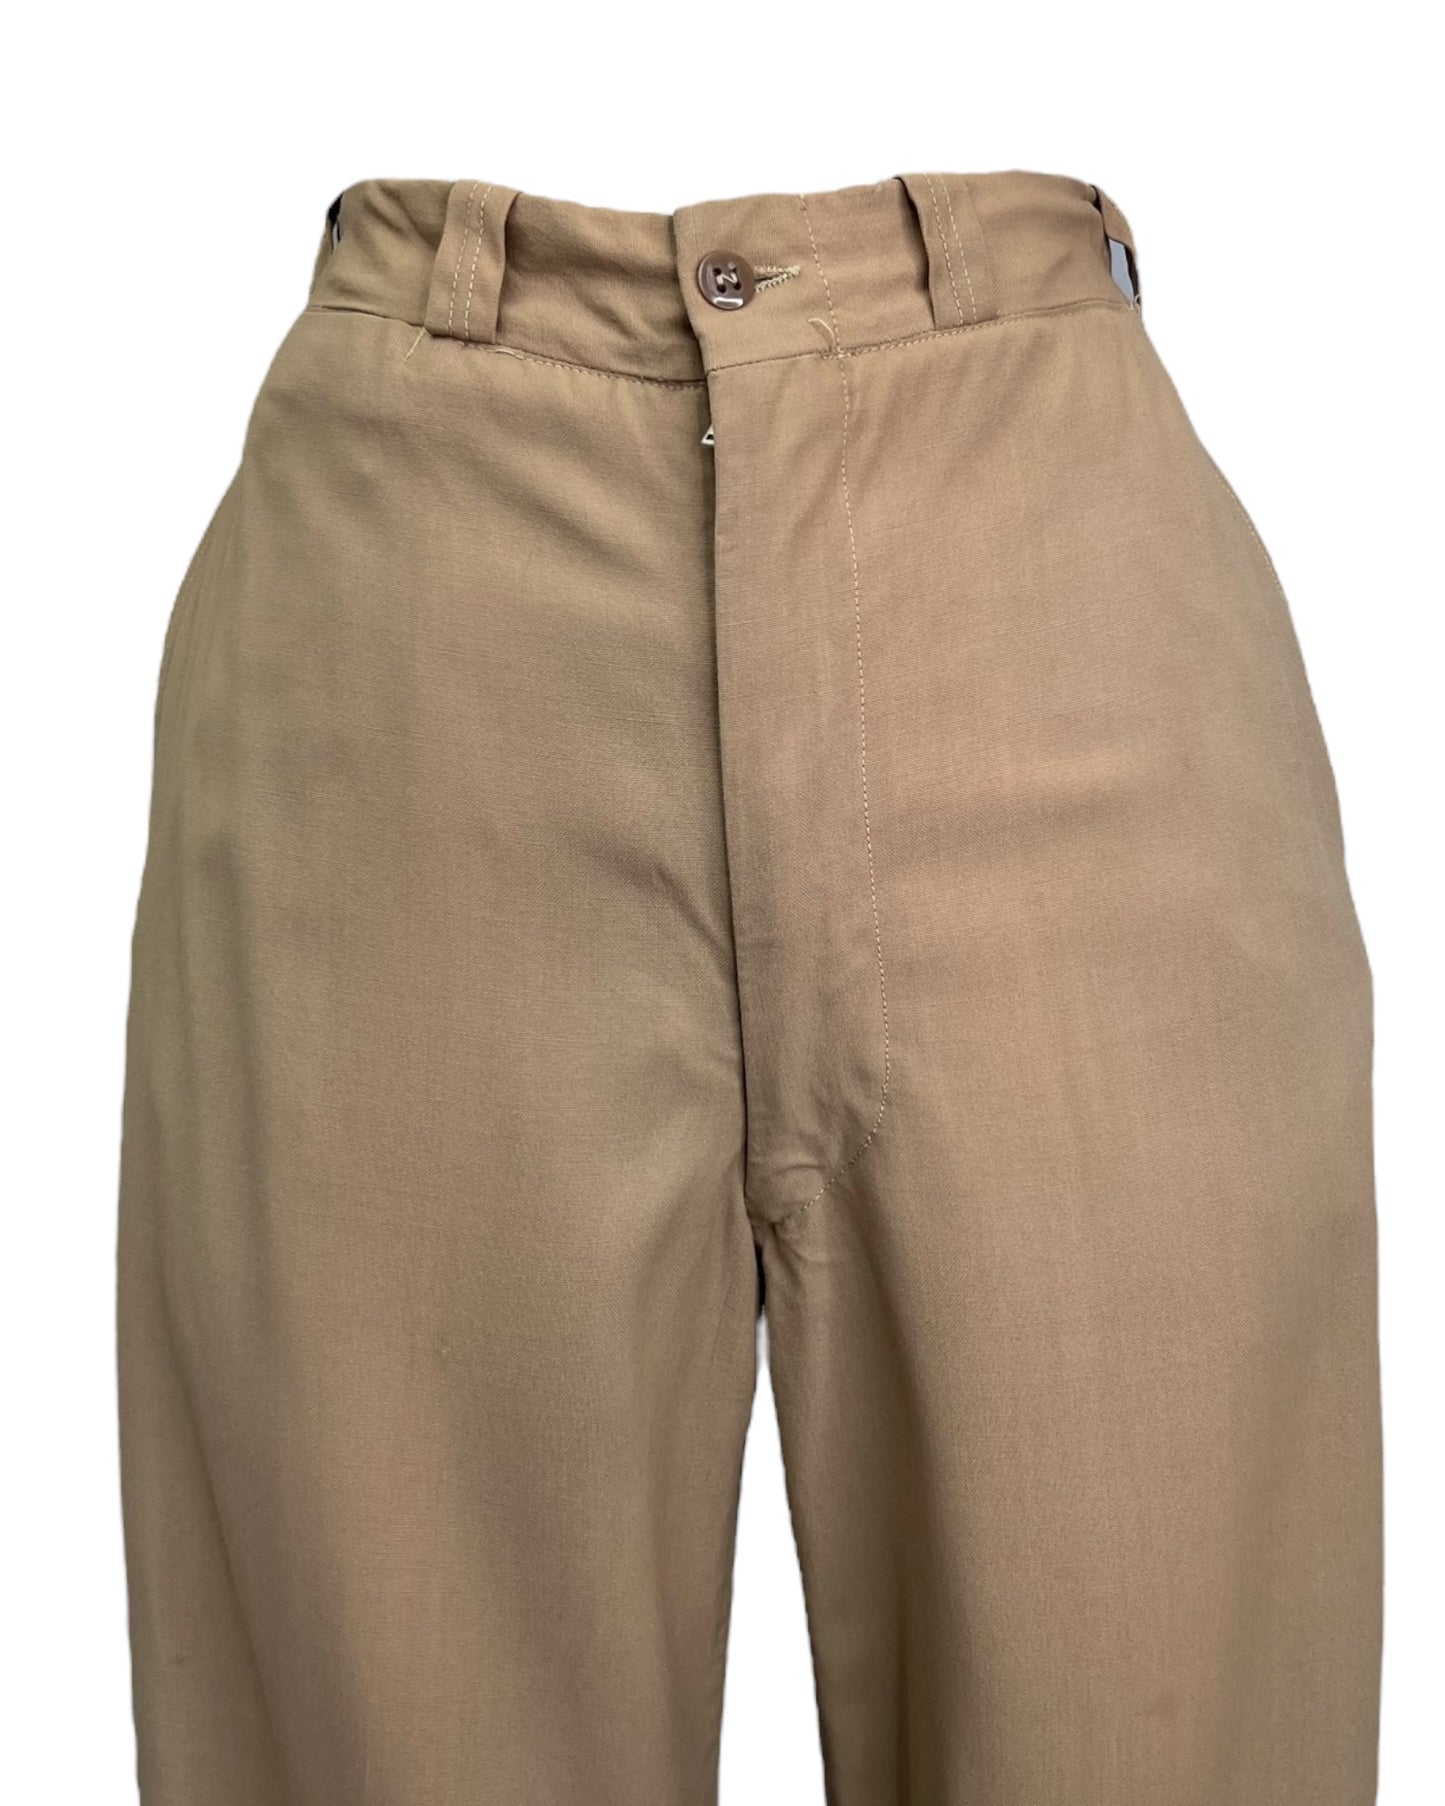 1970s Jake From State Farm Pants*